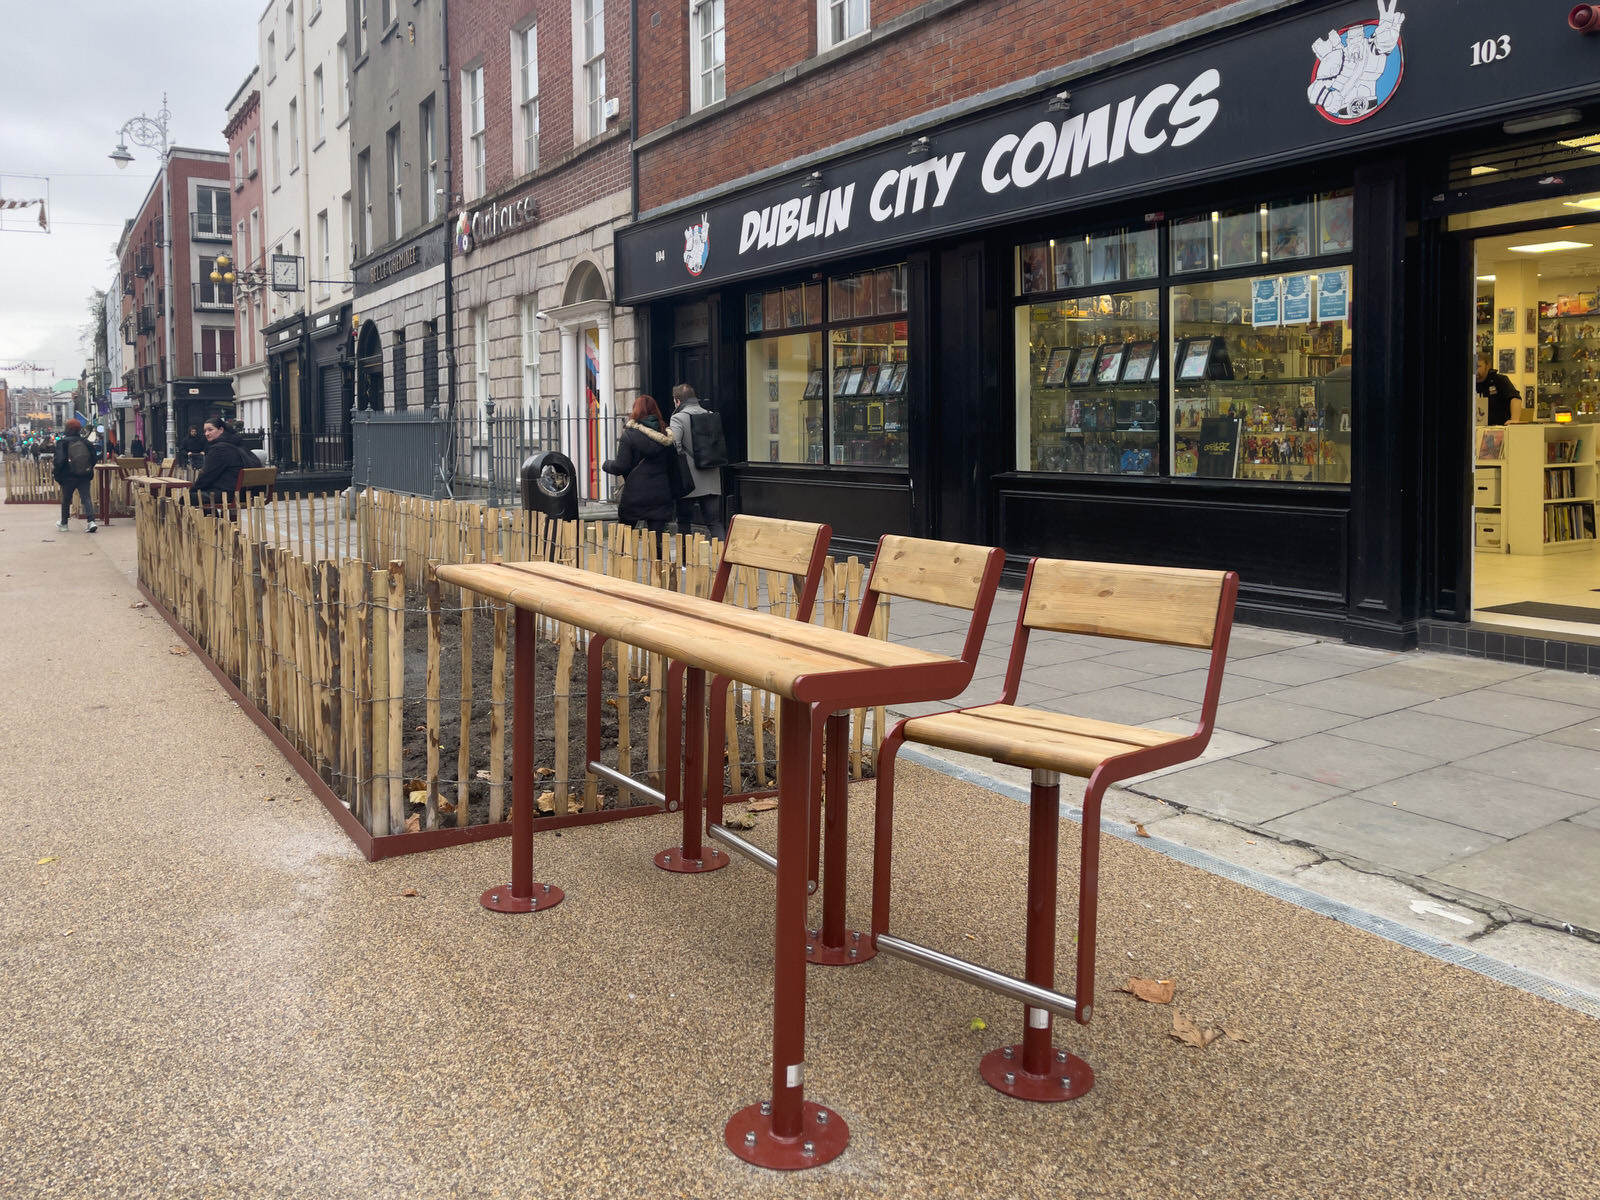 THE NEW STREET FURNITURE IS BEING INSTALLED ON CAPEL STREET [BUT THERE ARE FEW VISITORS TO BE SEEN TODAY] 001